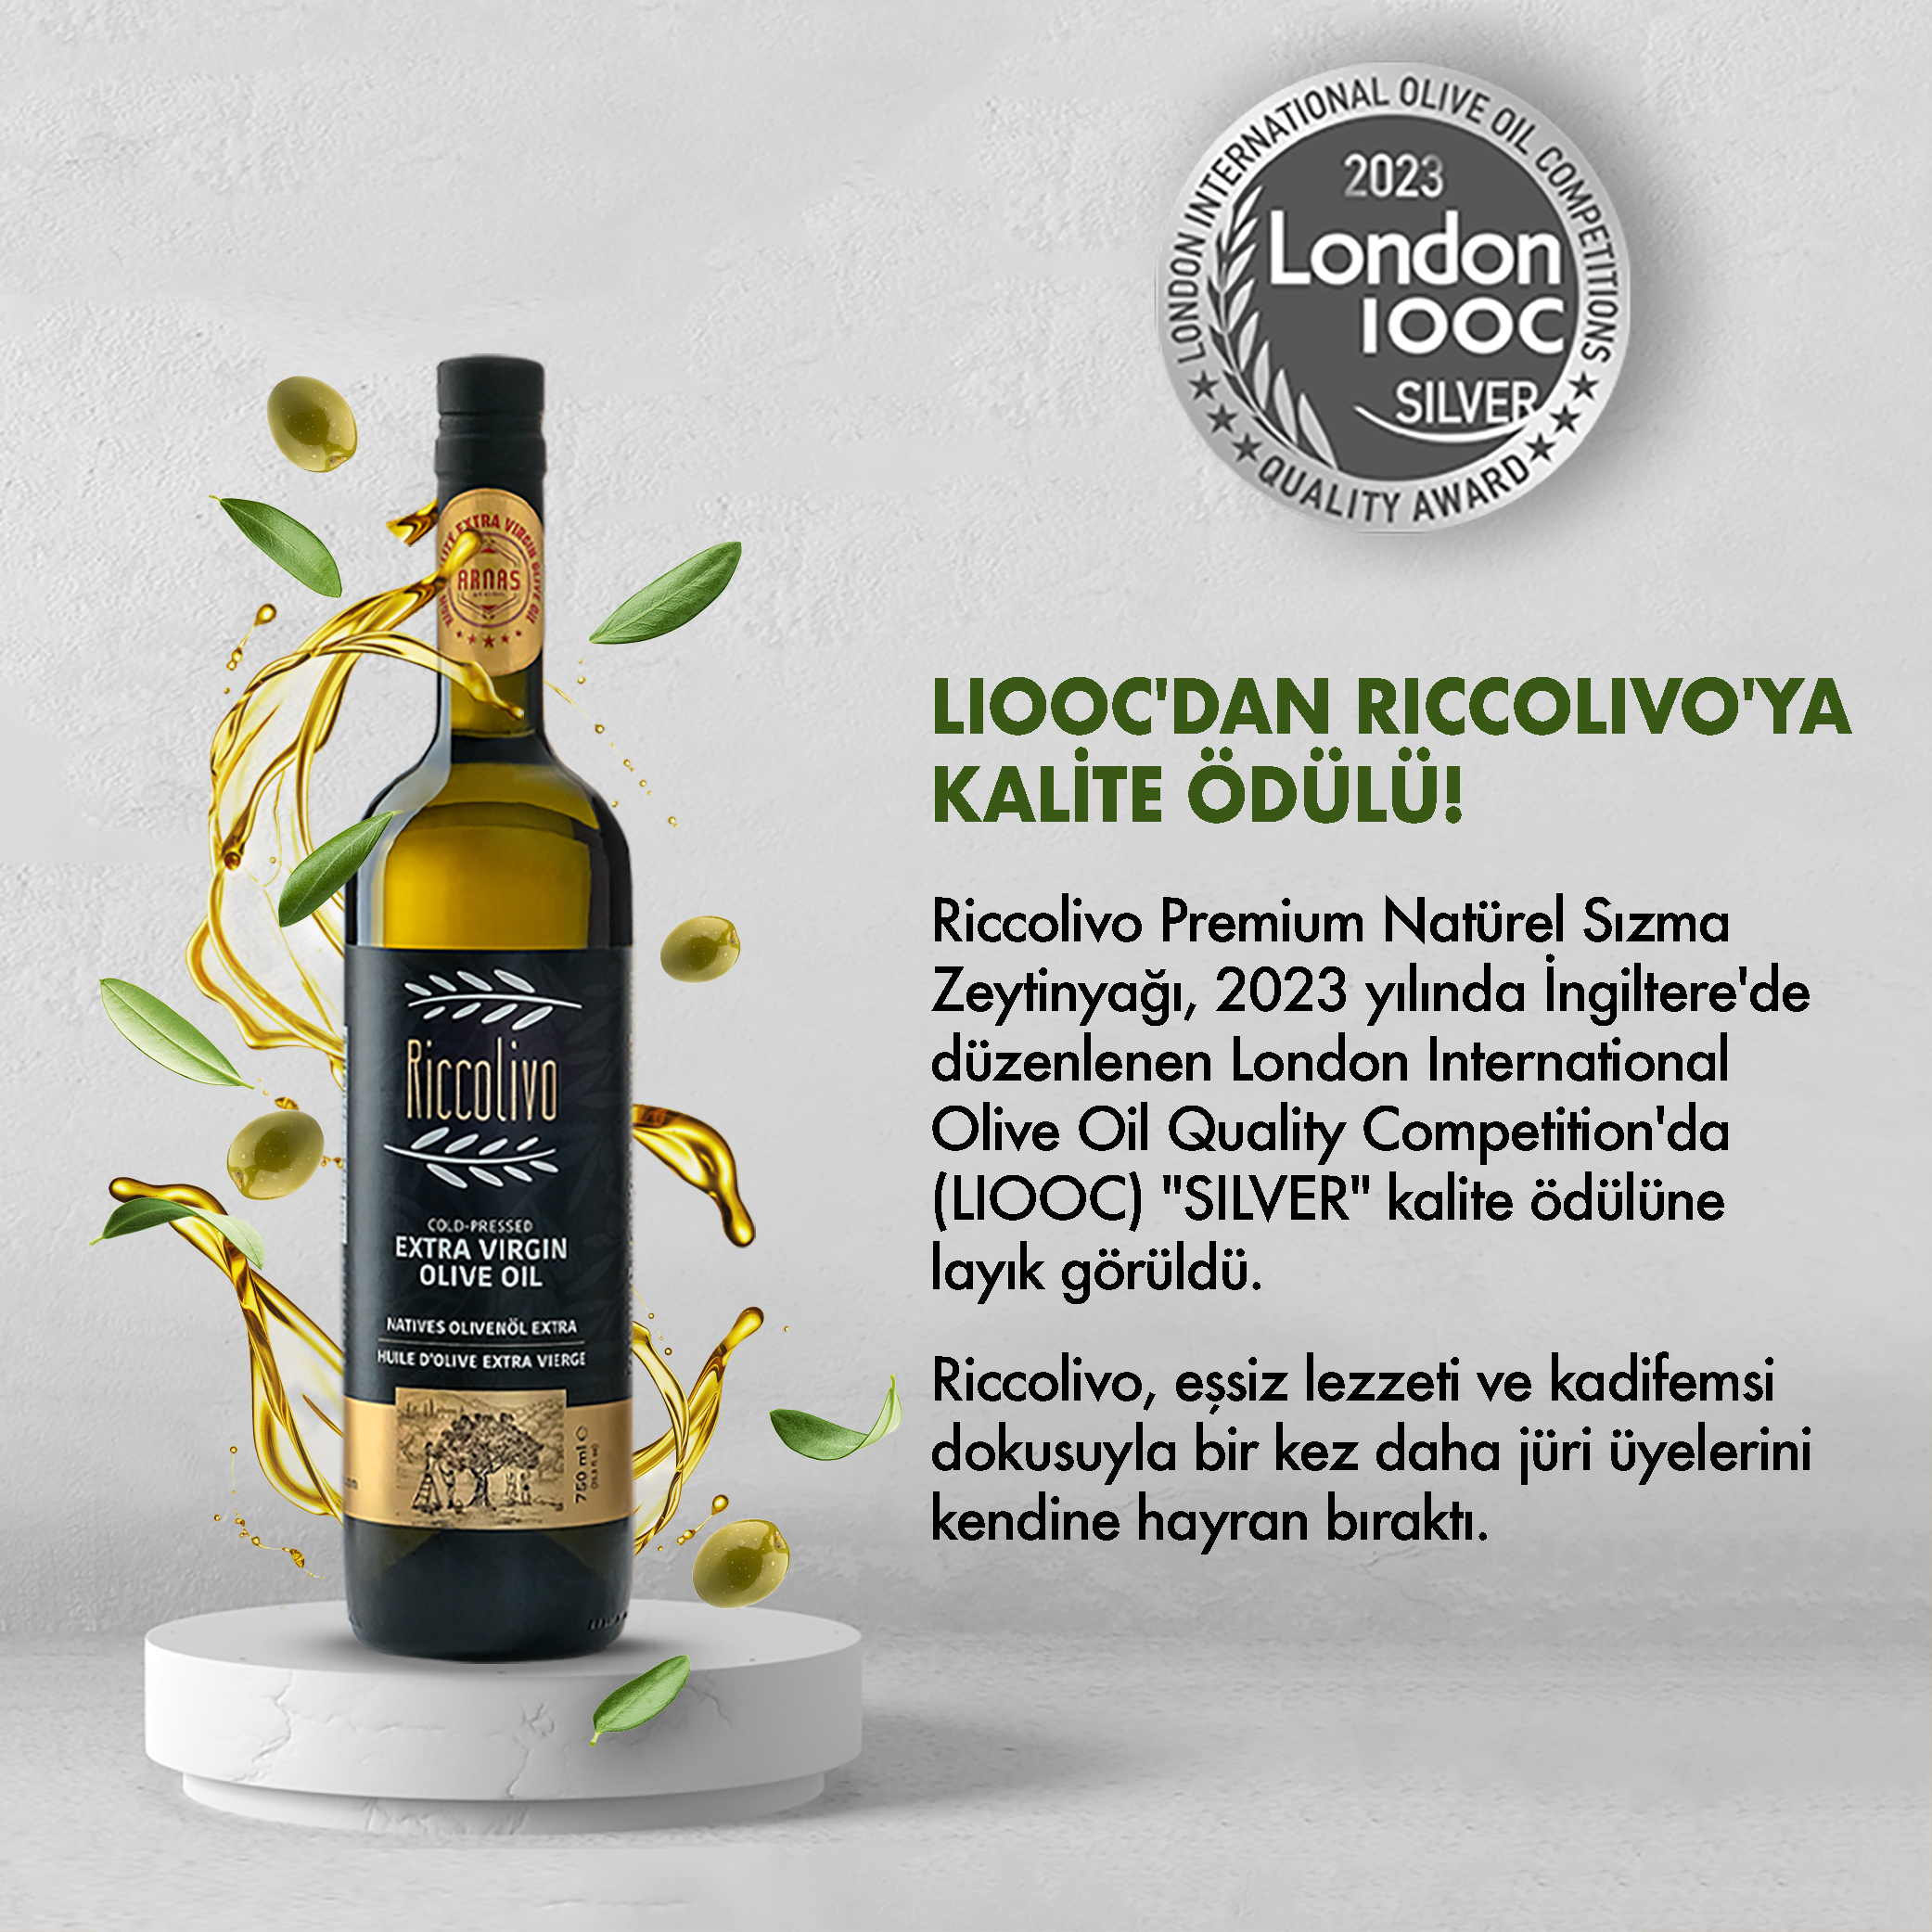 Riccolivo London International Olive Oil Competitions Awards TR 2023-1.jpg (1.71 MB)